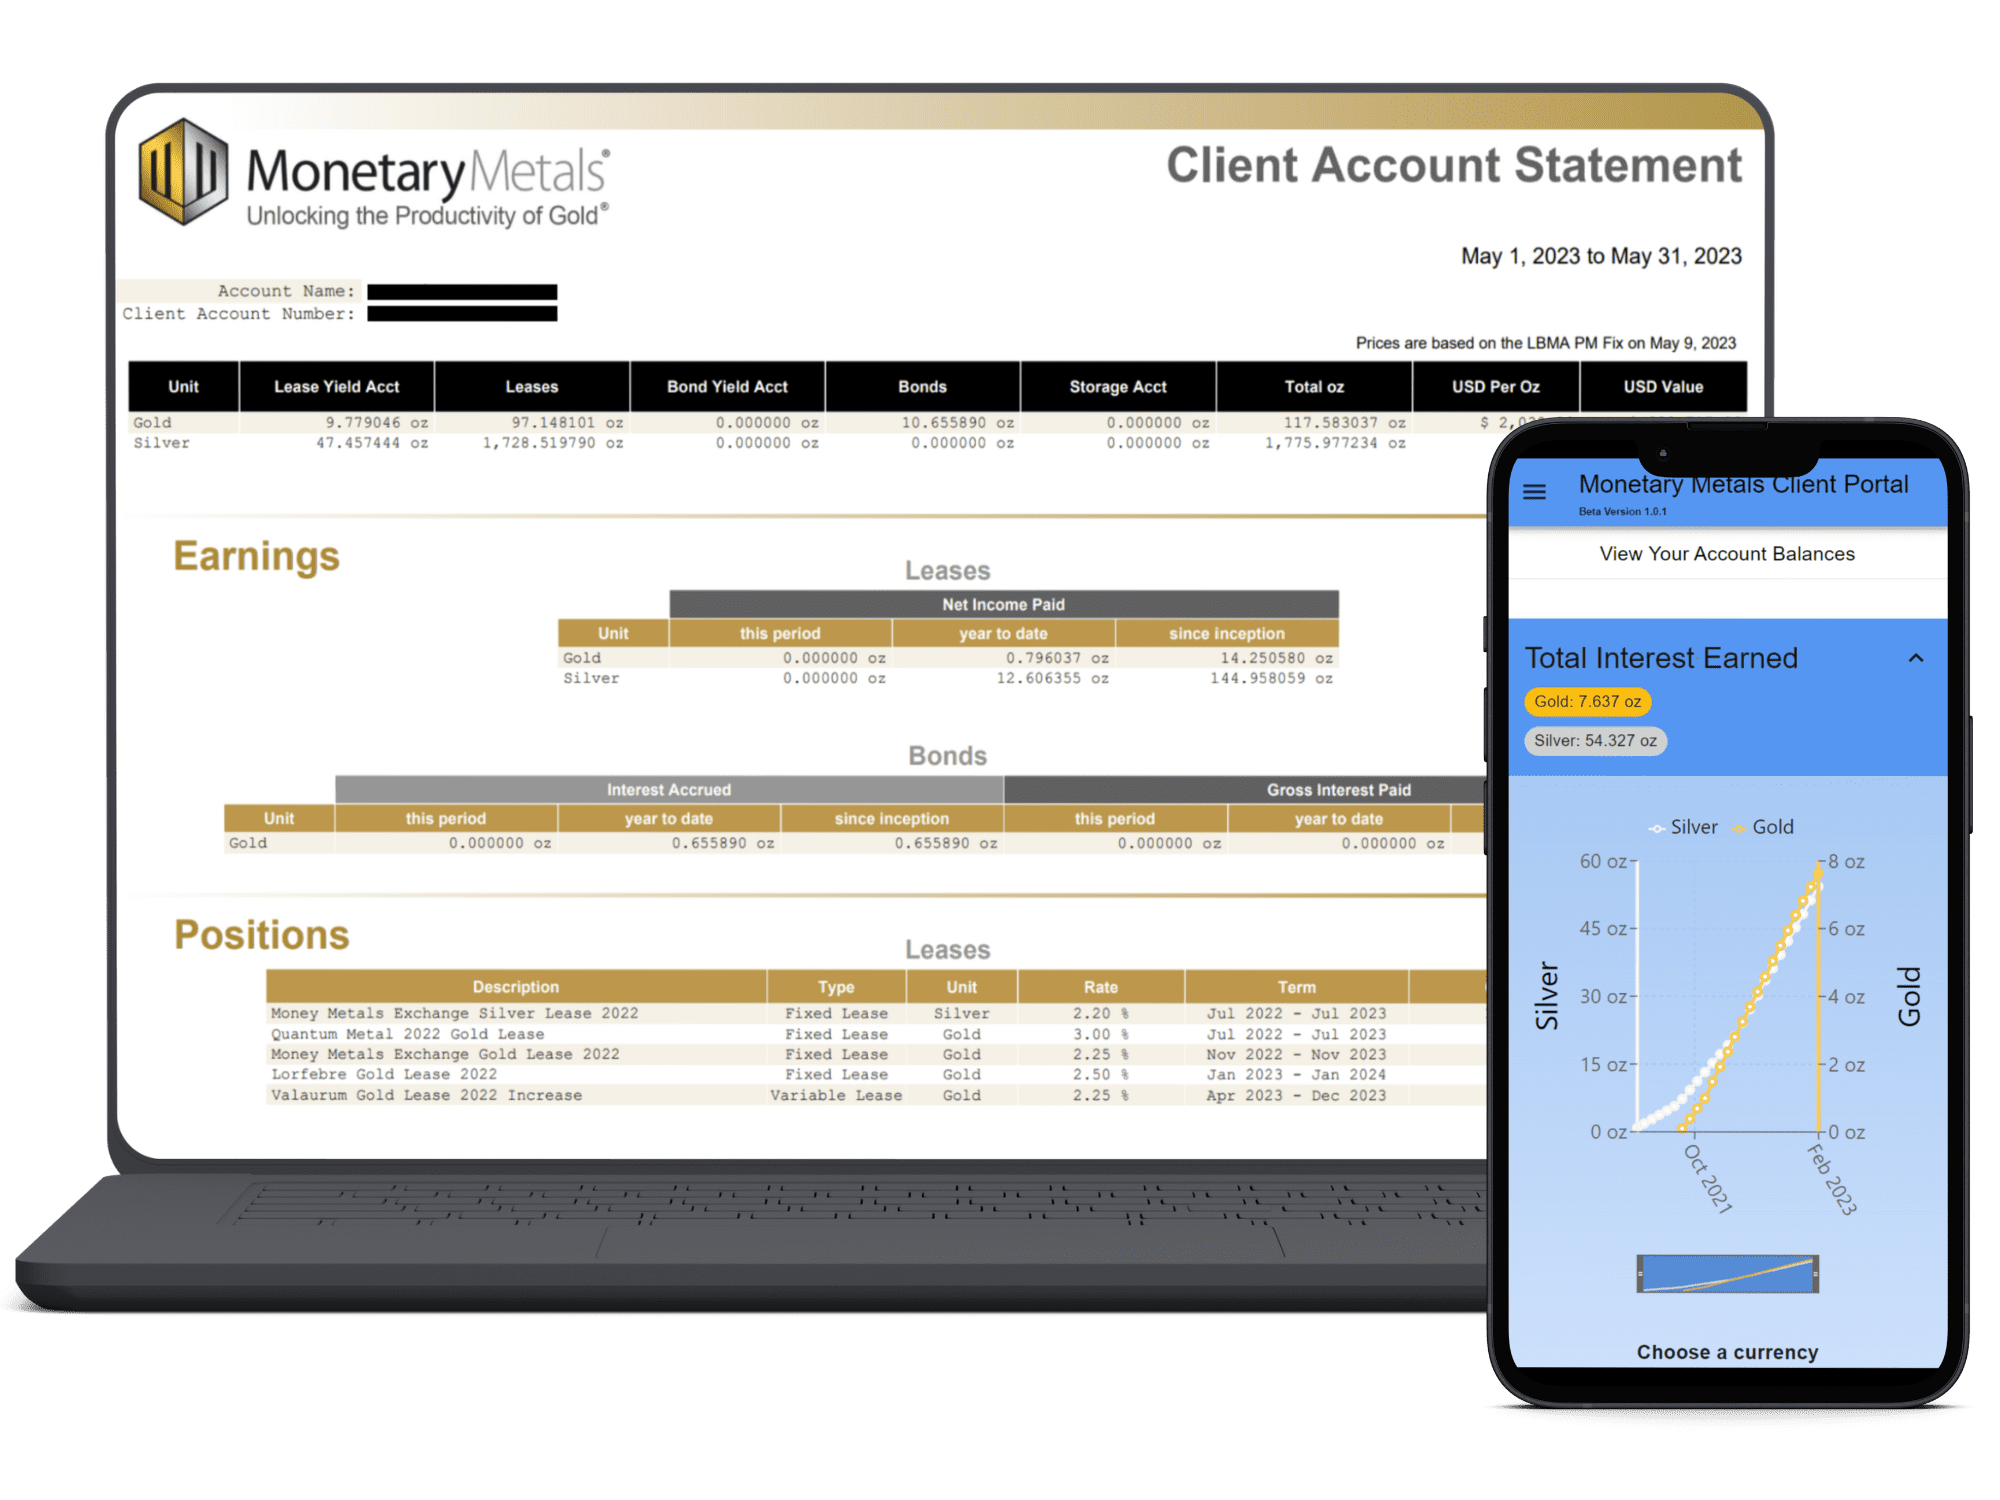 Monetary Metals Account Statement and Online Client Portal